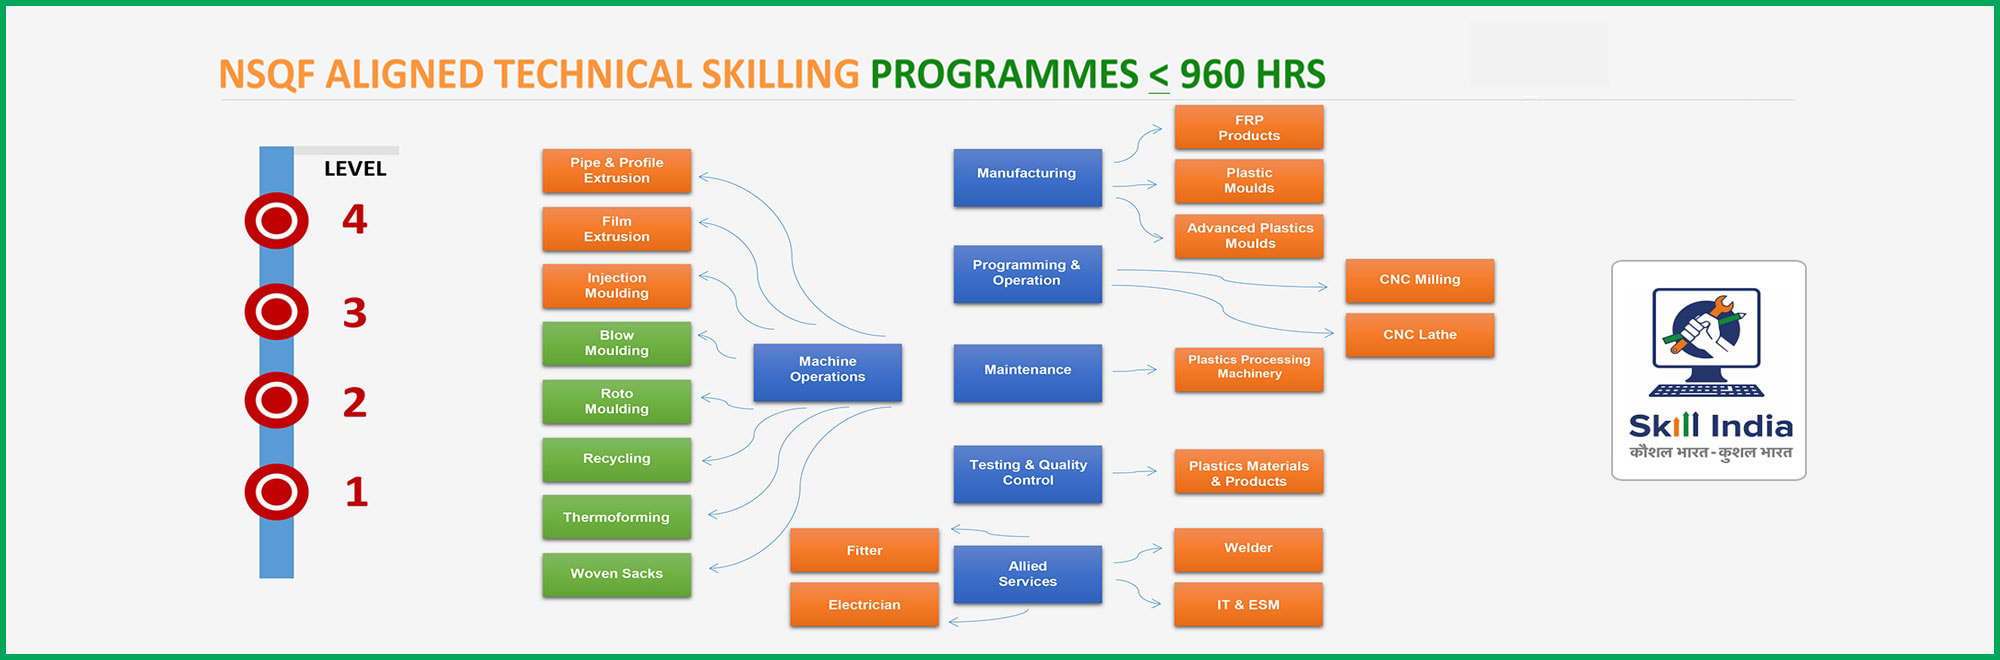 NSQF ALIGNED TECHNICAL SKILLING PROGRAMMES <= 960 HRS